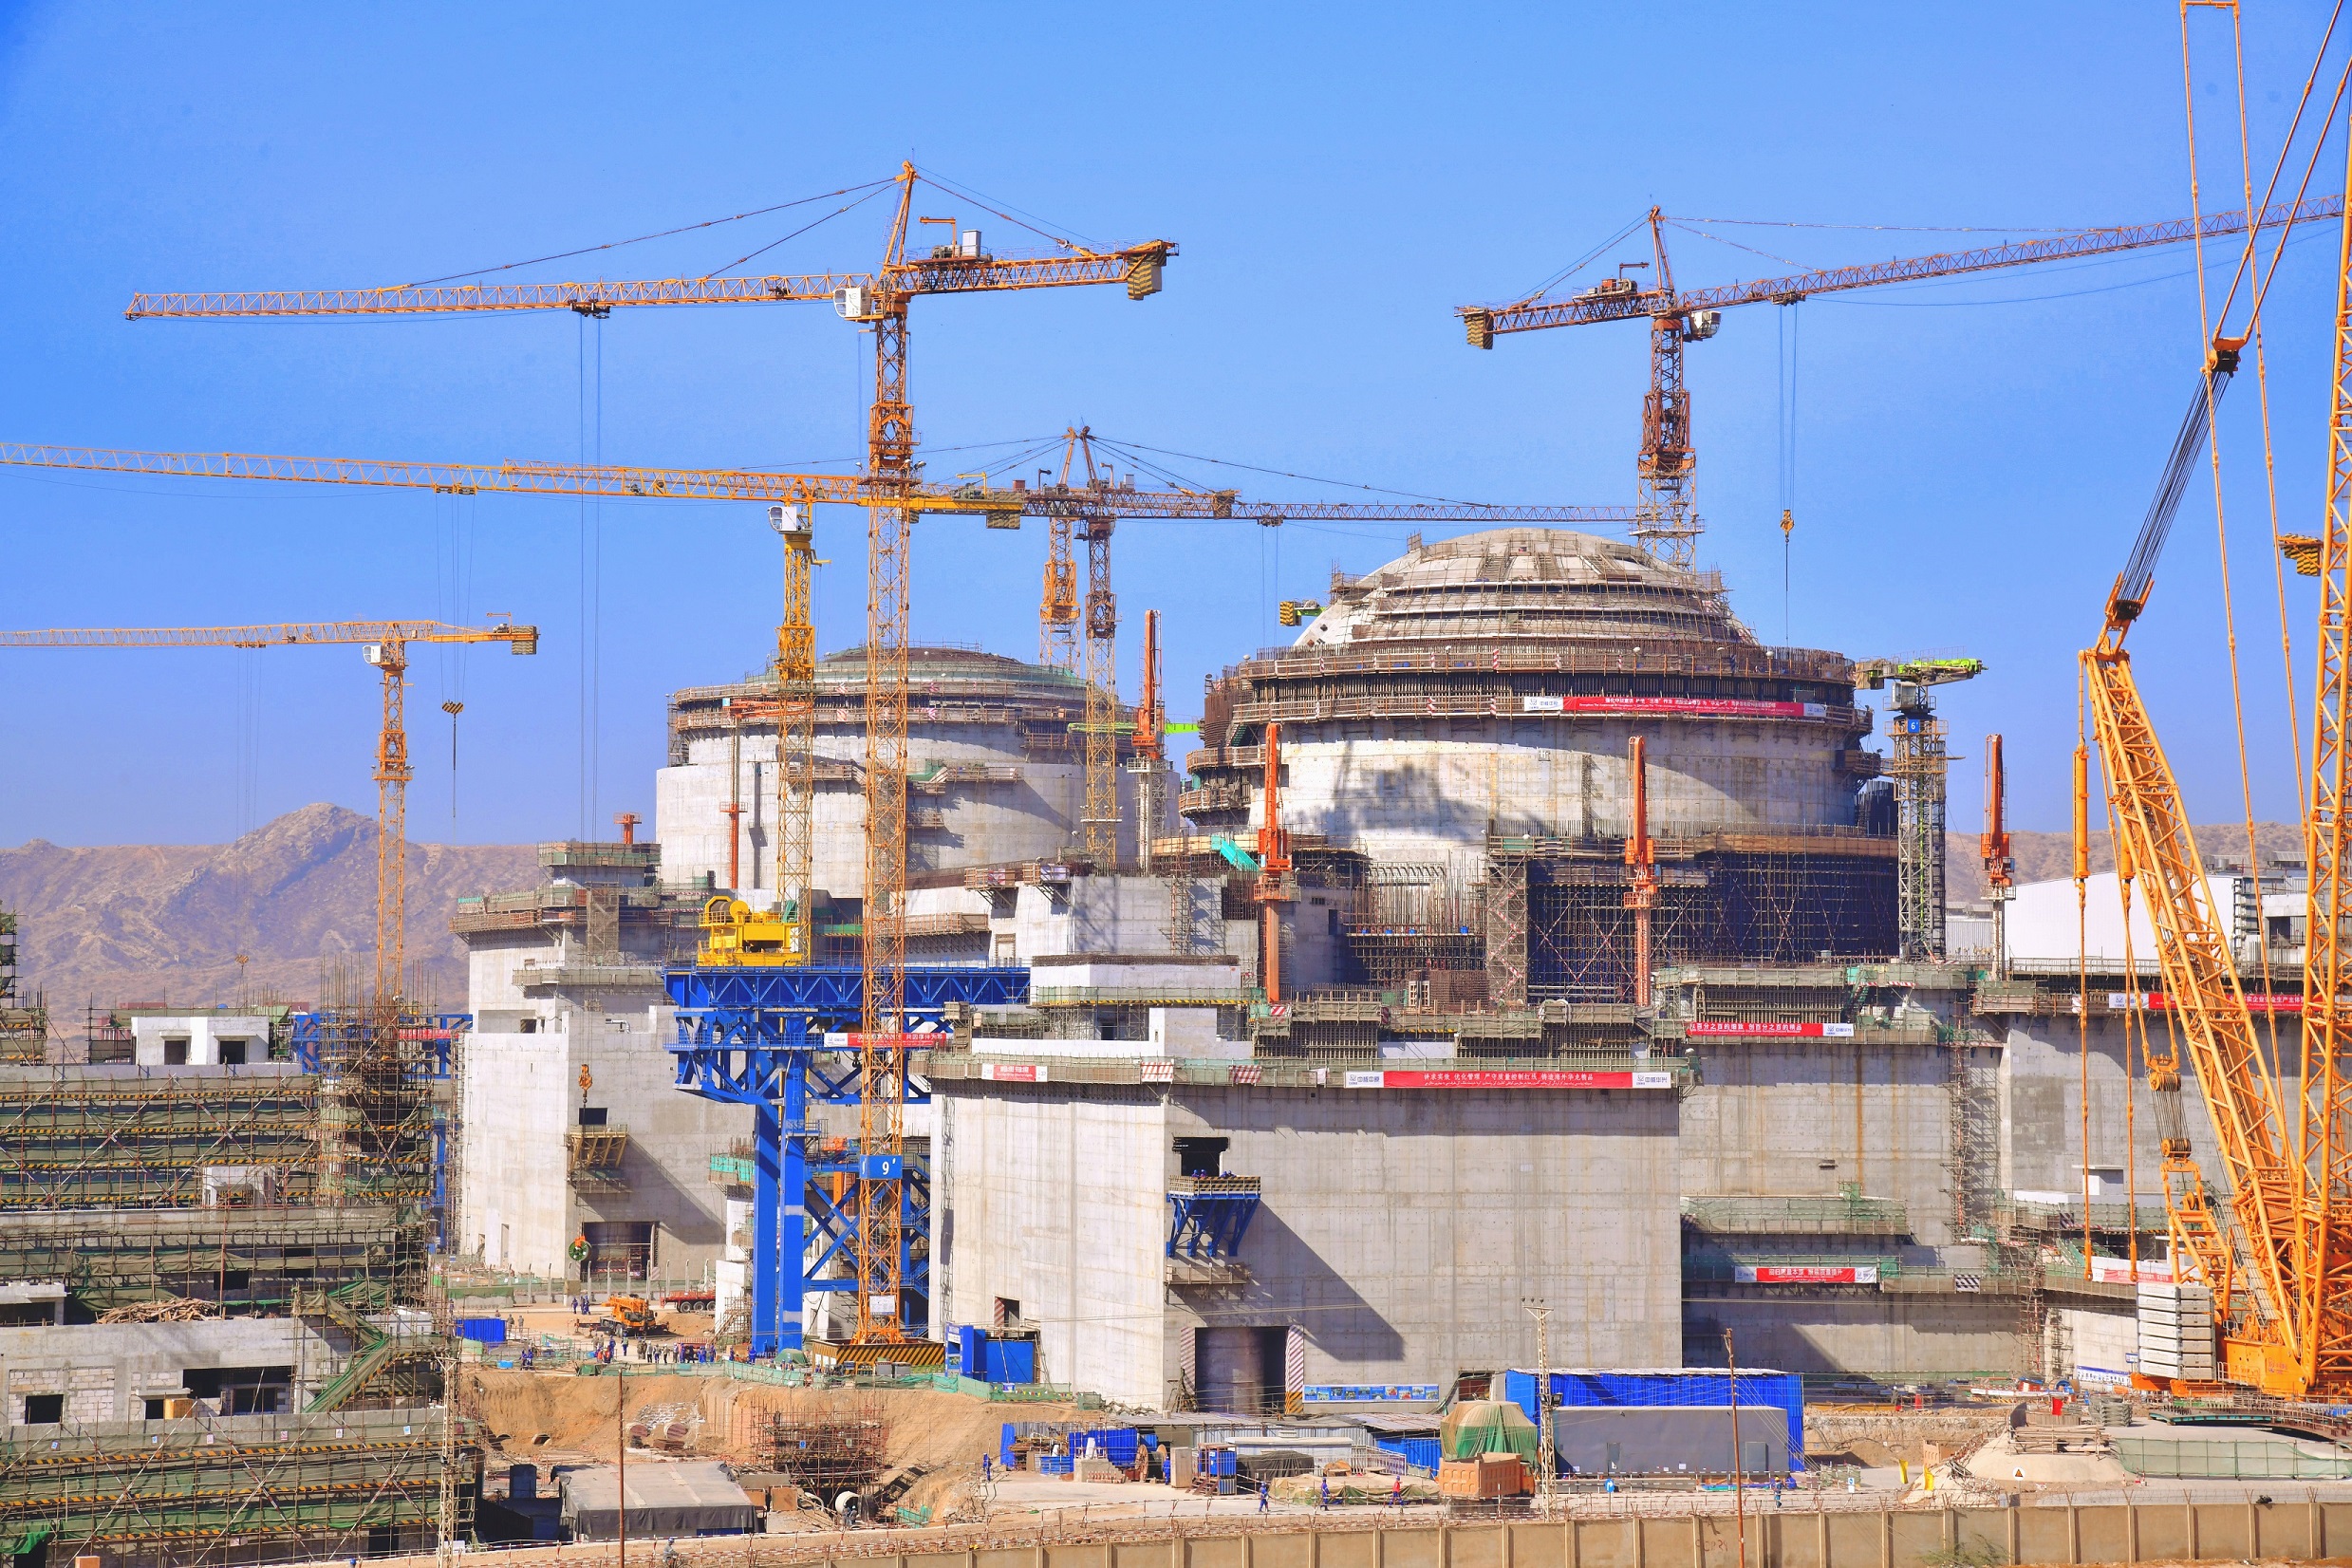 Chashma C-4 Nuclear Power Plant at Chashma, on January 02, 2014